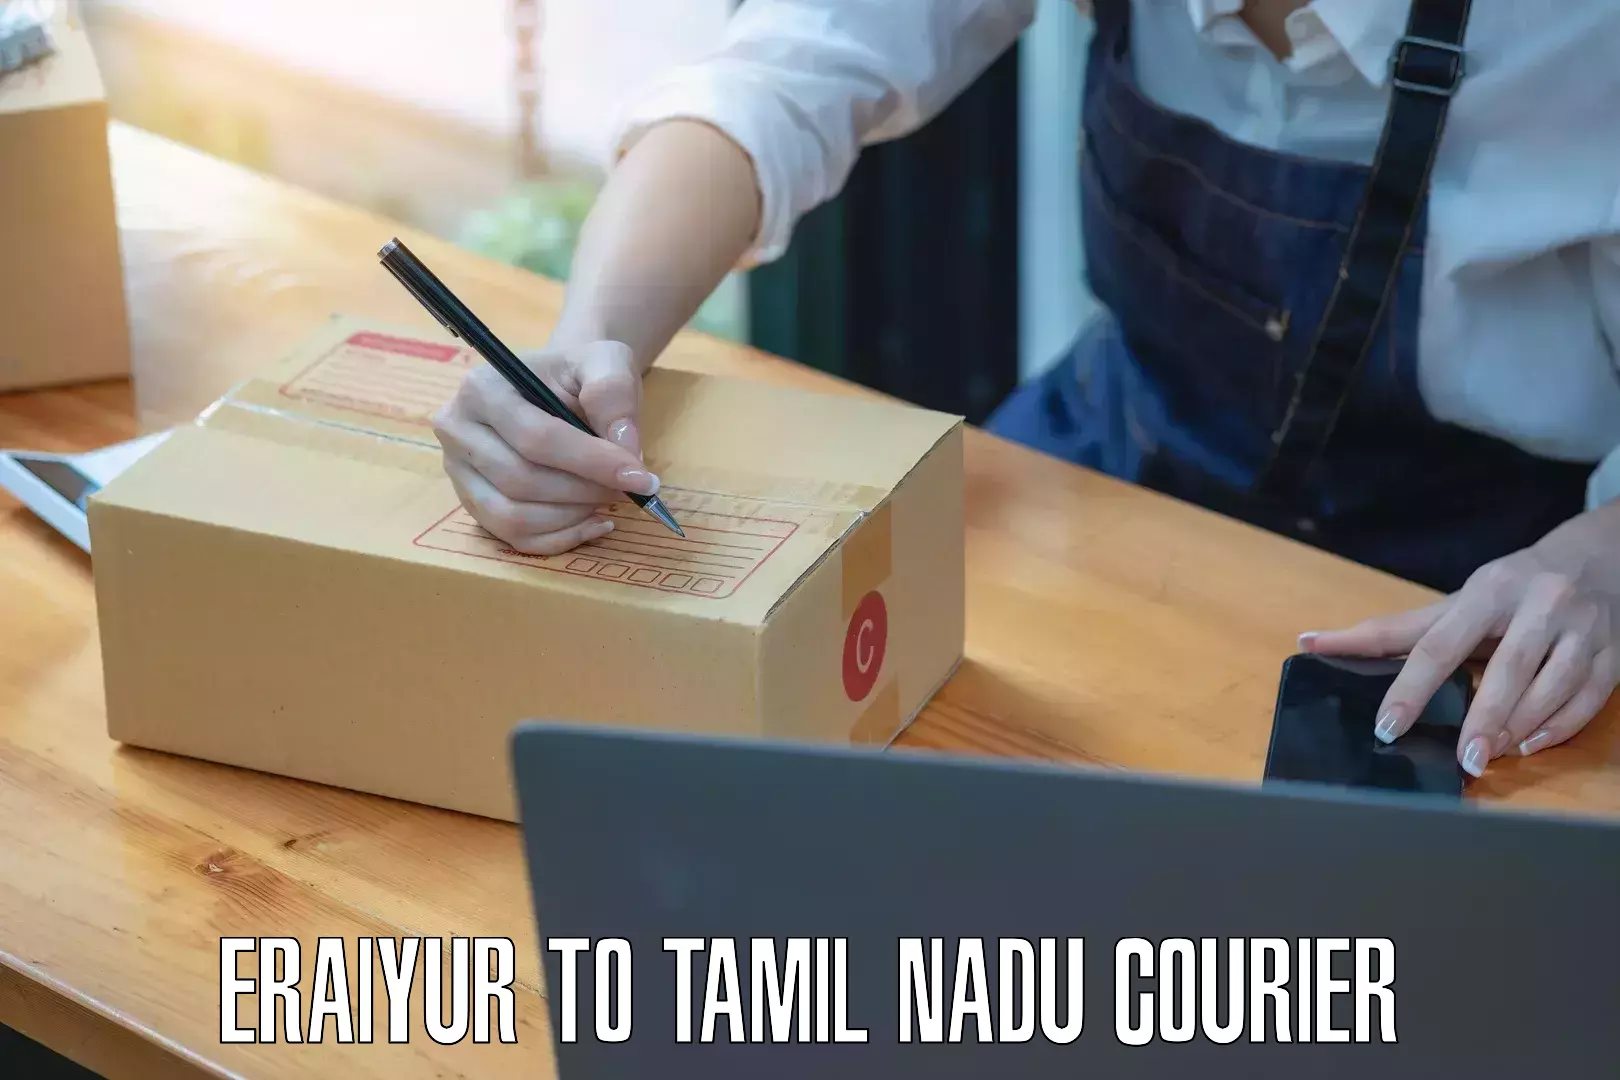 Bulk order courier Eraiyur to Sri Ramachandra Institute of Higher Education and Research Chennai